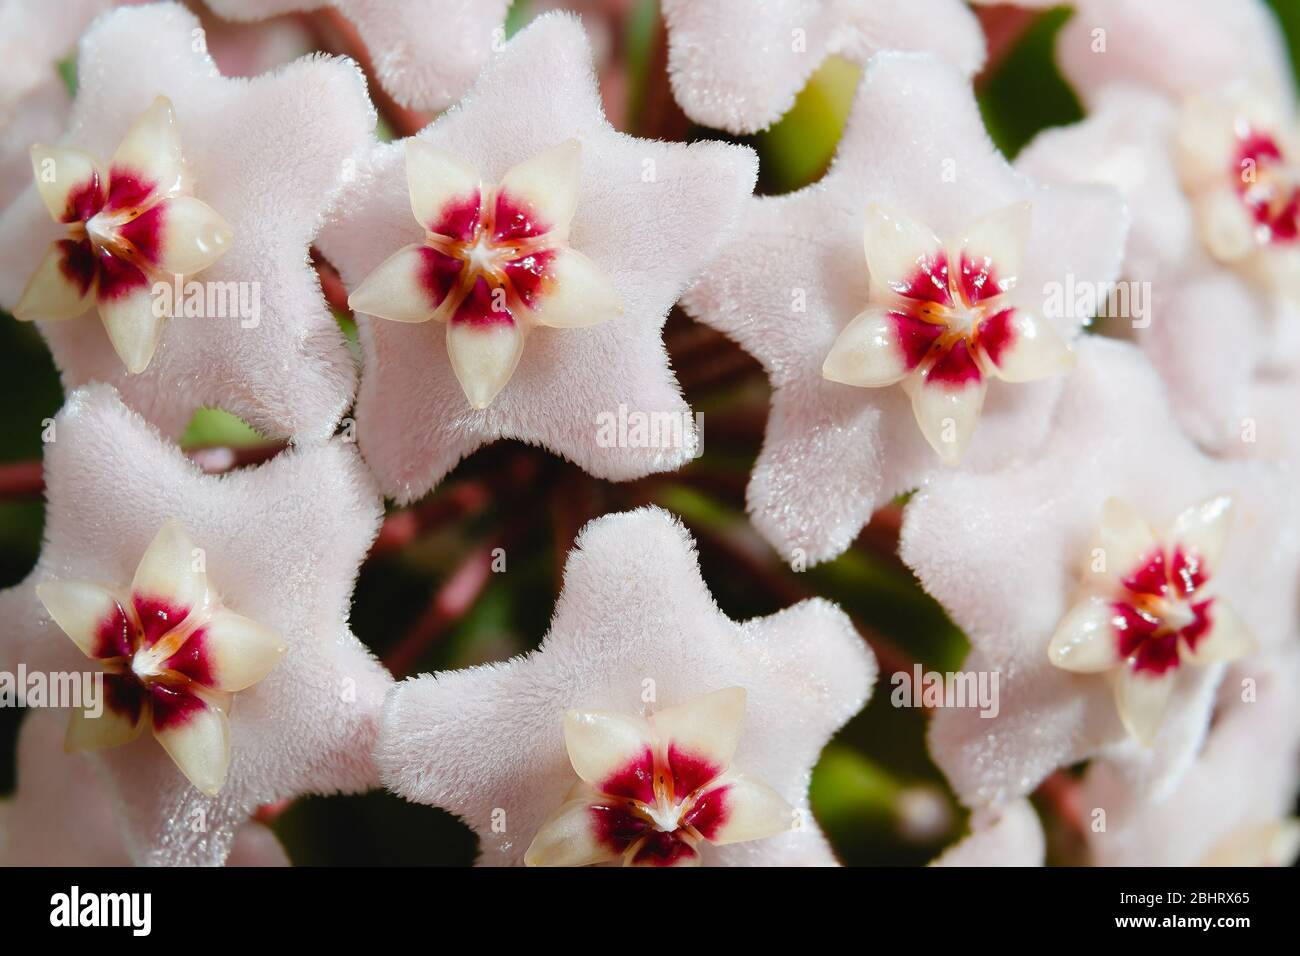 Star shape flower, Hoya Carnosa, also known as porcelain flower or wax plant. Macro photo on the branch of flower. Stock Photo